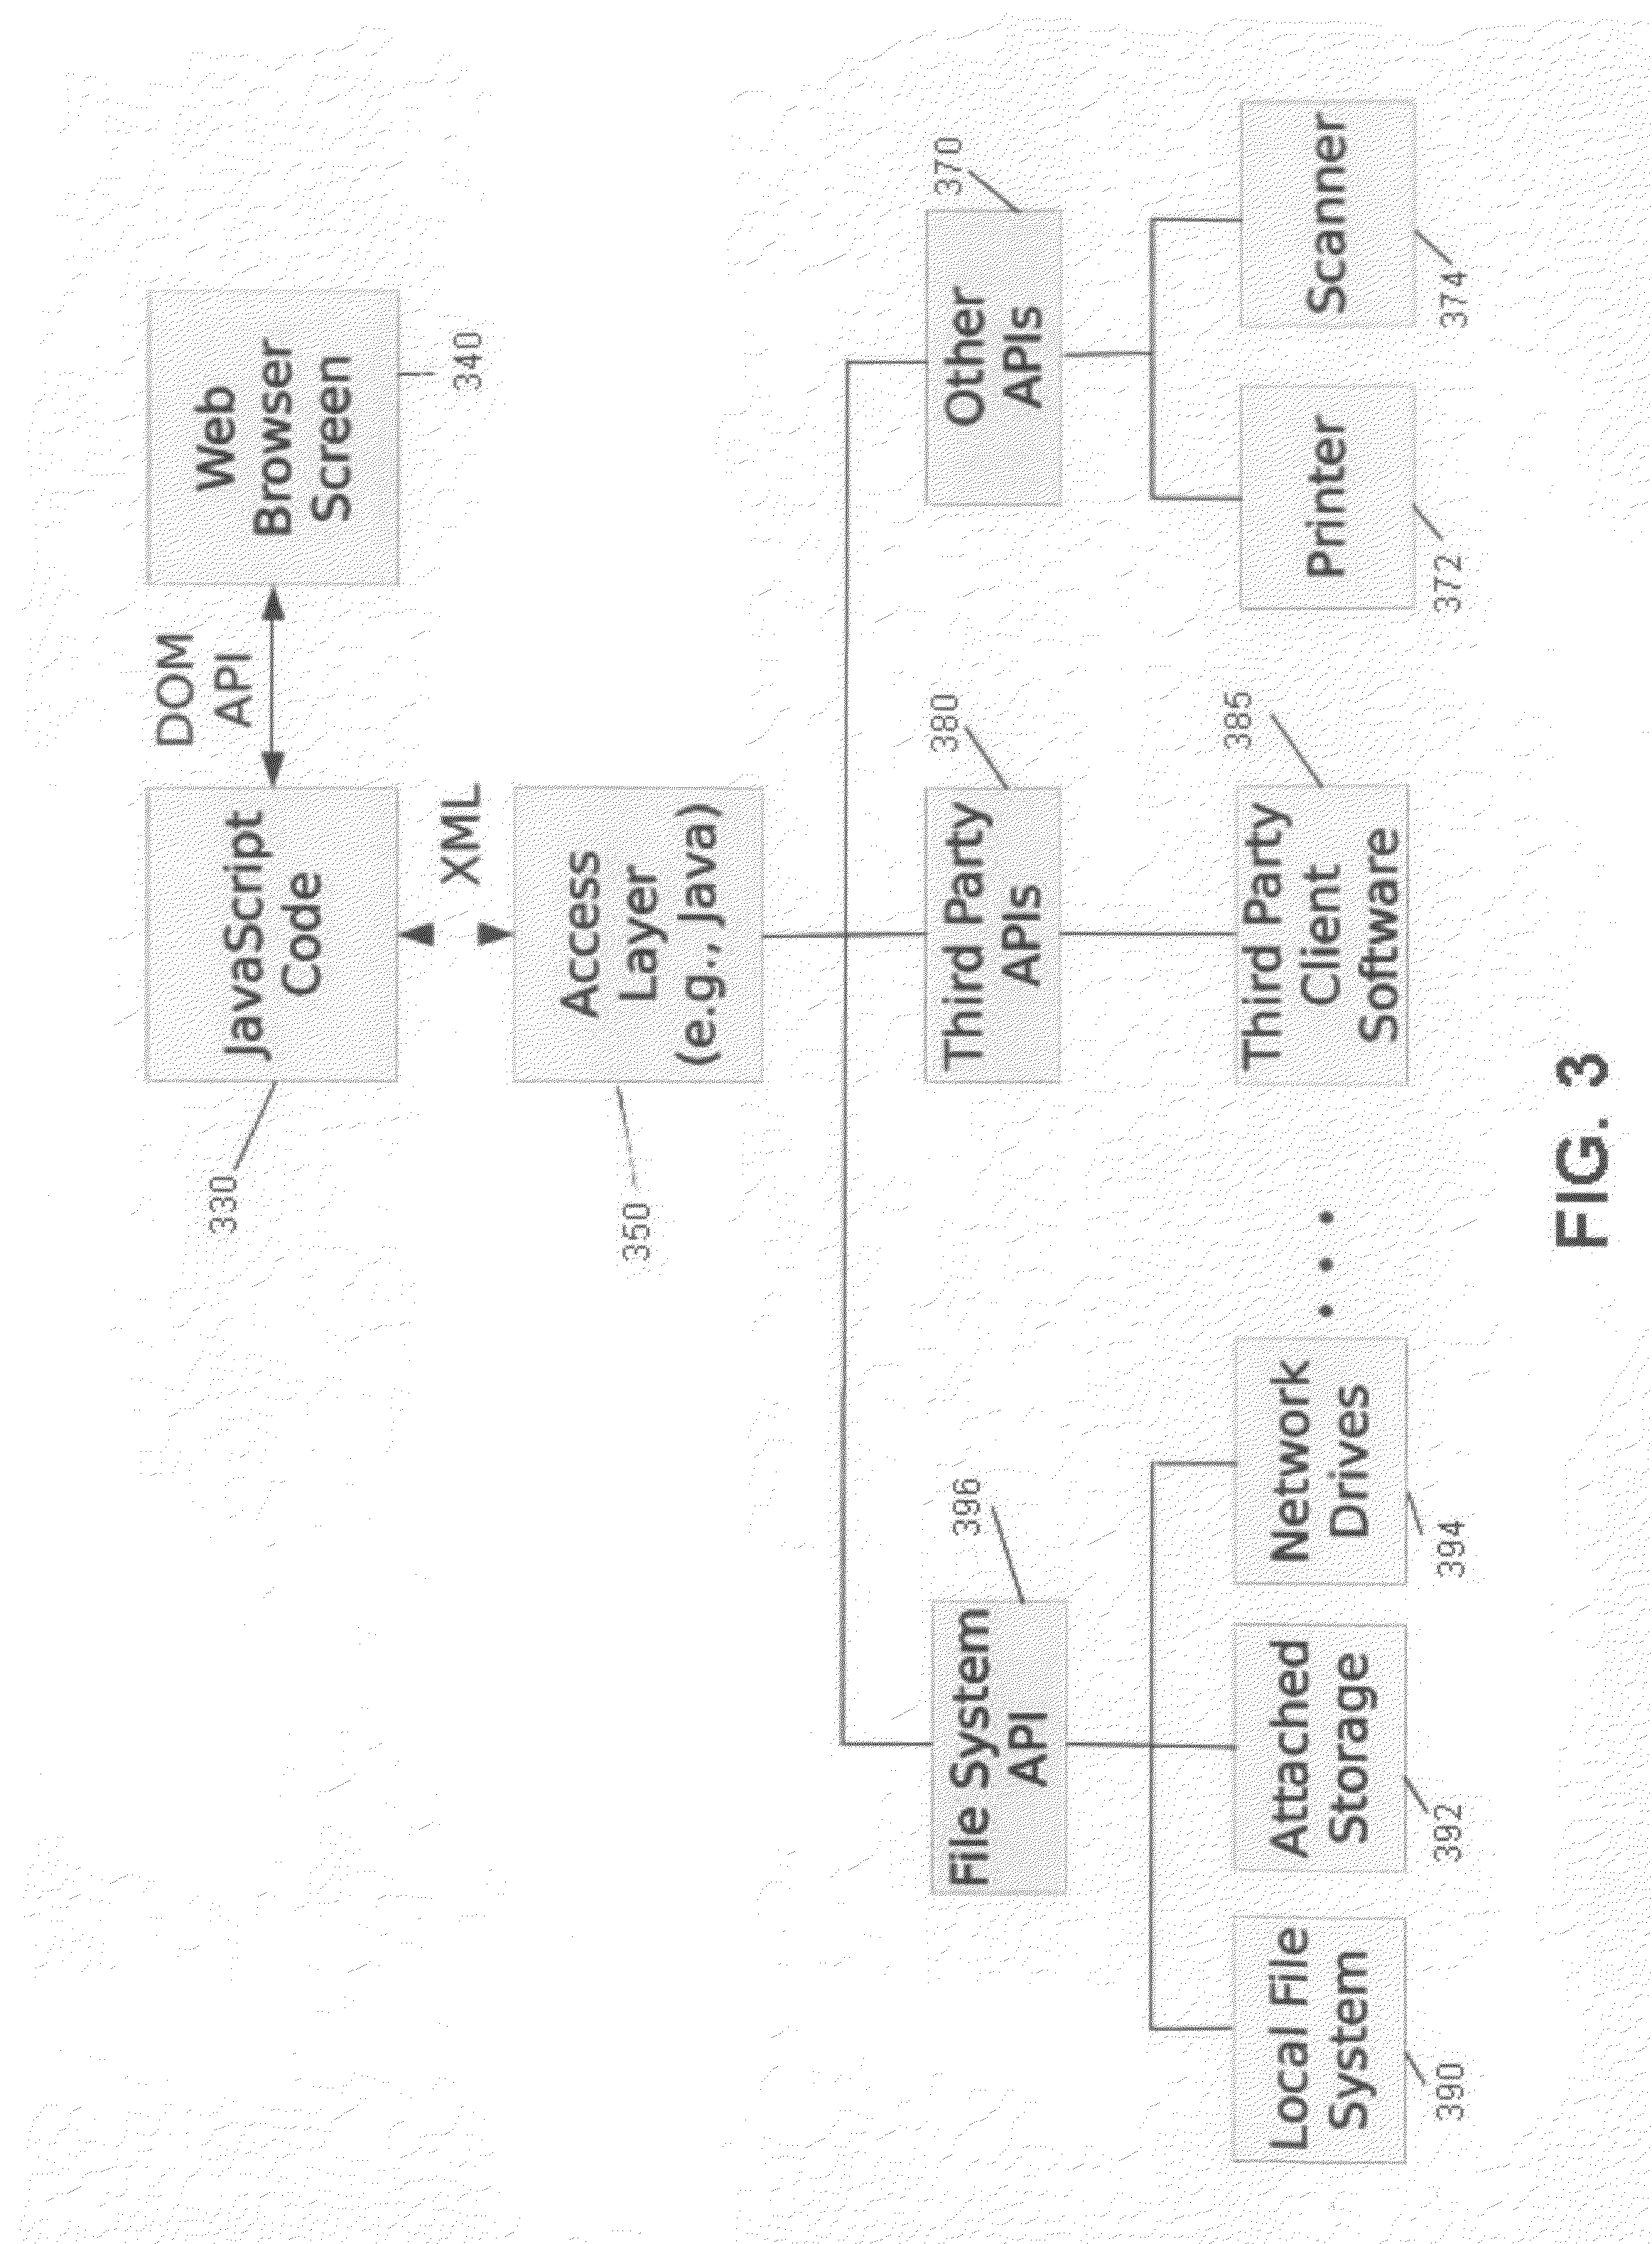 Method and apparatus for interactions of web applications with the local host environment